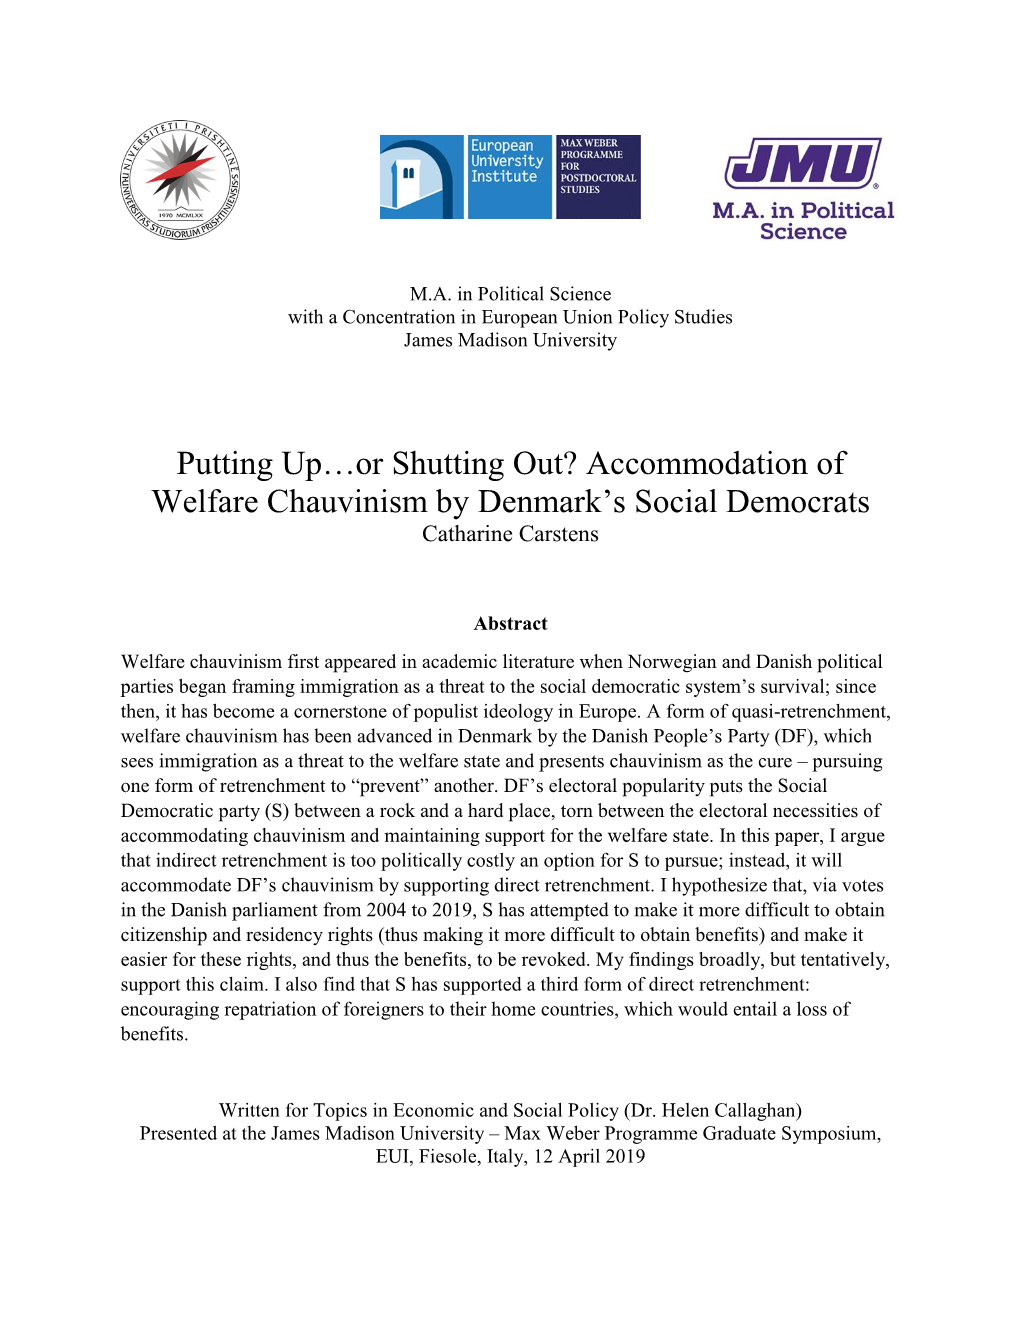 Accommodation of Welfare Chauvinism by Denmarkâ•Žs Social Democrats